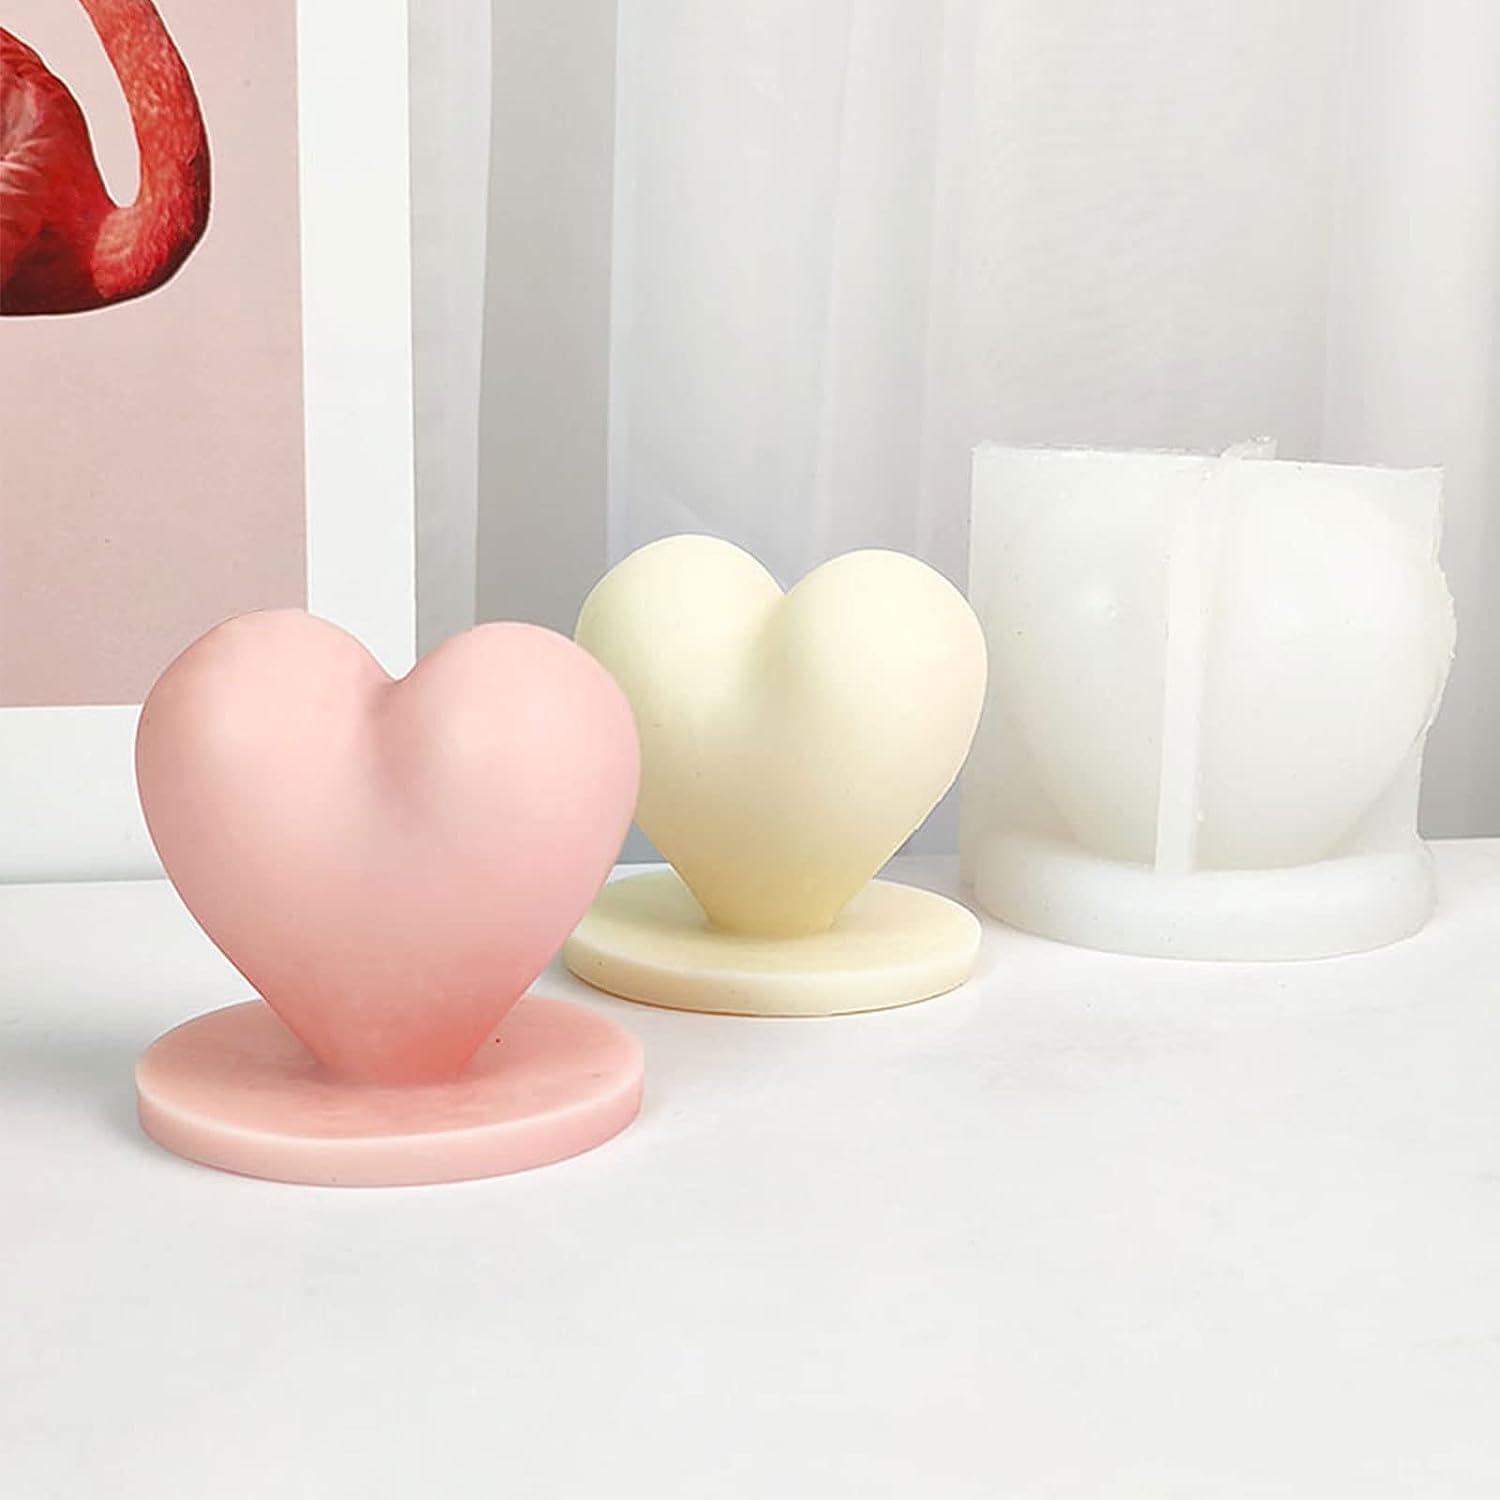 Midnadiy Love Heart Silicone Mold, 3D Rose Candle Molds for Candle Making,  Heart Charm Epoxy Resin Molds for DIY Handmade Soaps, Resin Crafts